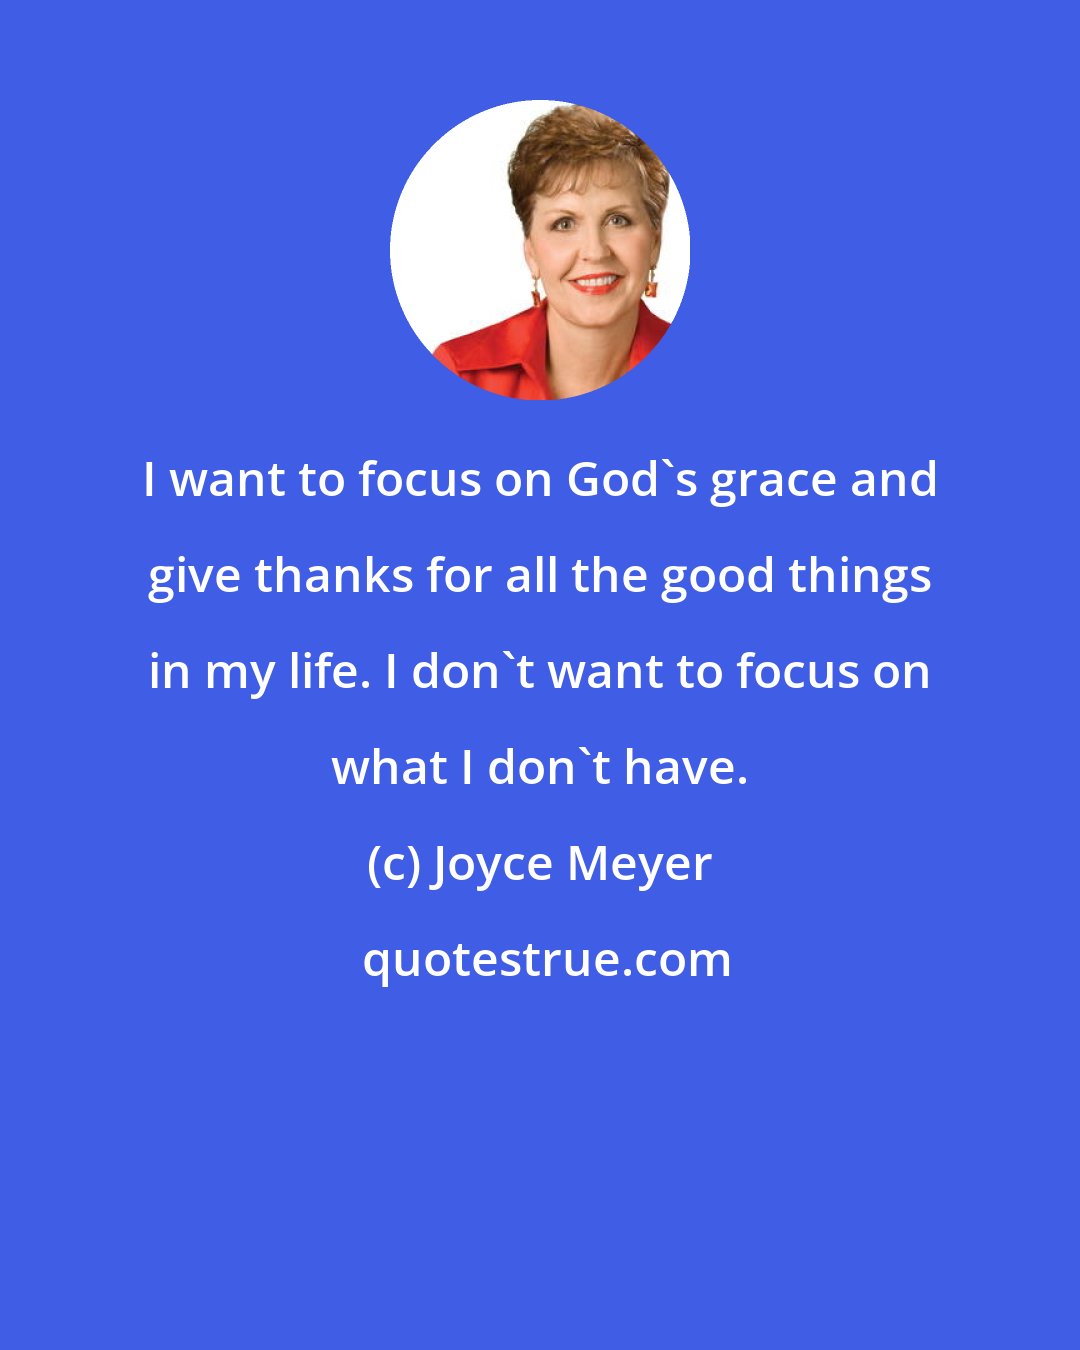 Joyce Meyer: I want to focus on God's grace and give thanks for all the good things in my life. I don't want to focus on what I don't have.